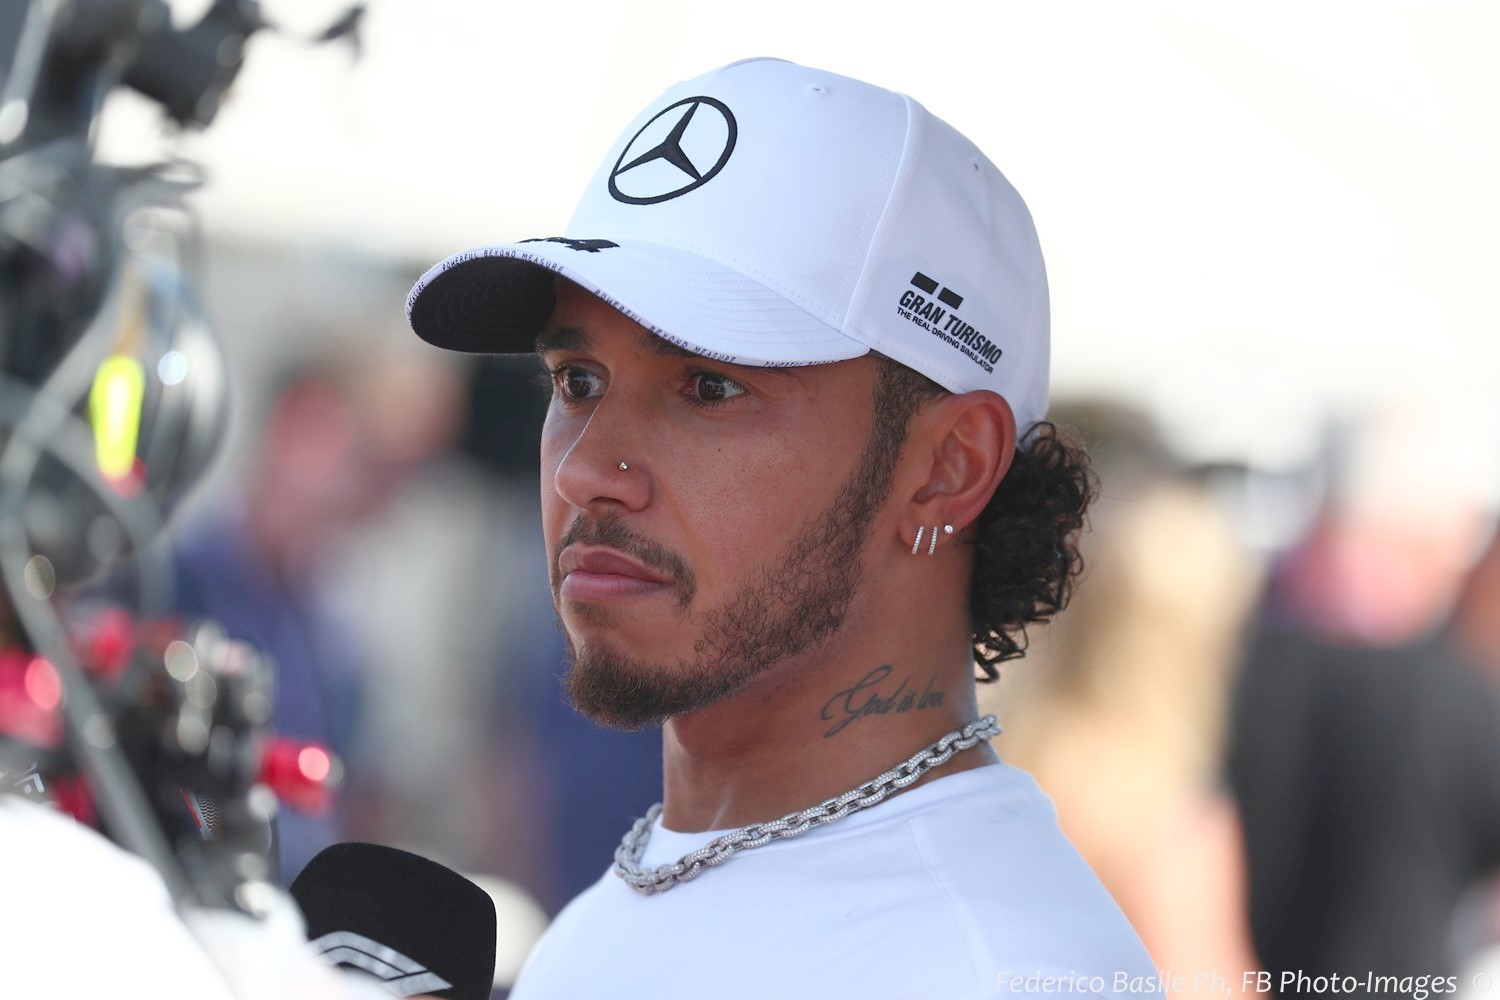 With Mercedes staying in F1 Hamilton not going anywhere